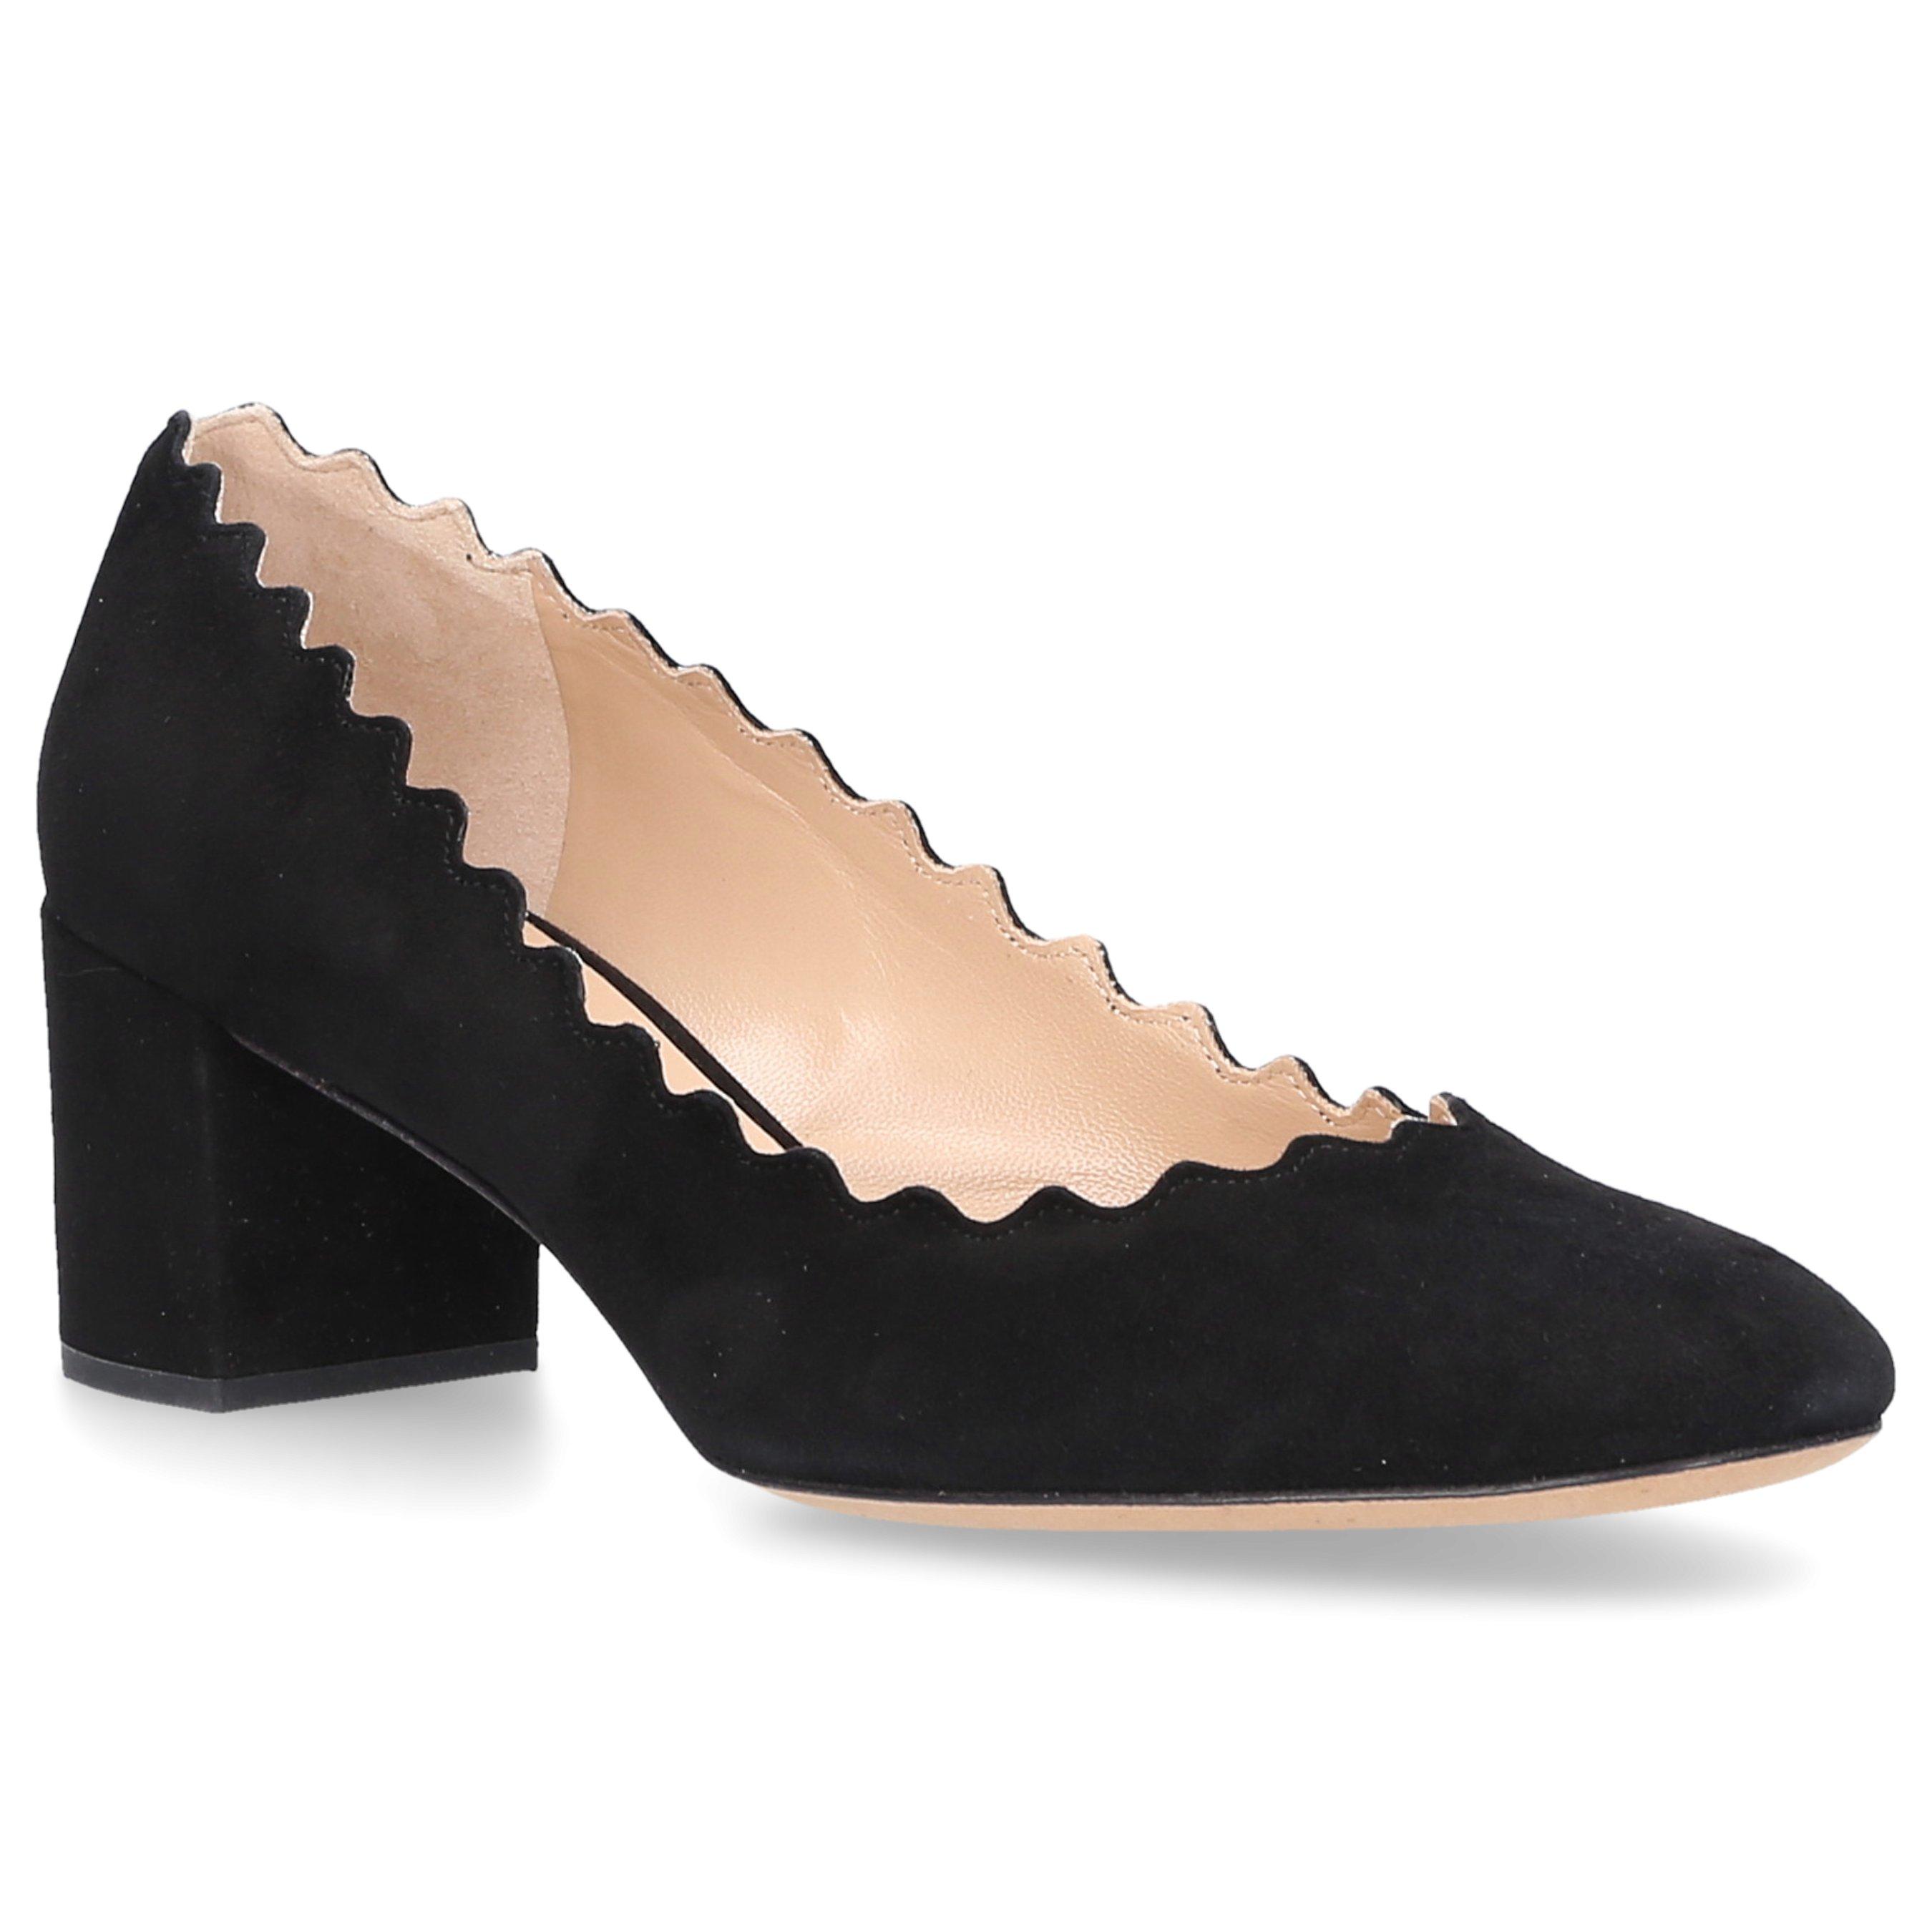 Chloé Lauren Scallop-Edged Leather Pumps in Charcoal (Black) - Save 63% |  Lyst